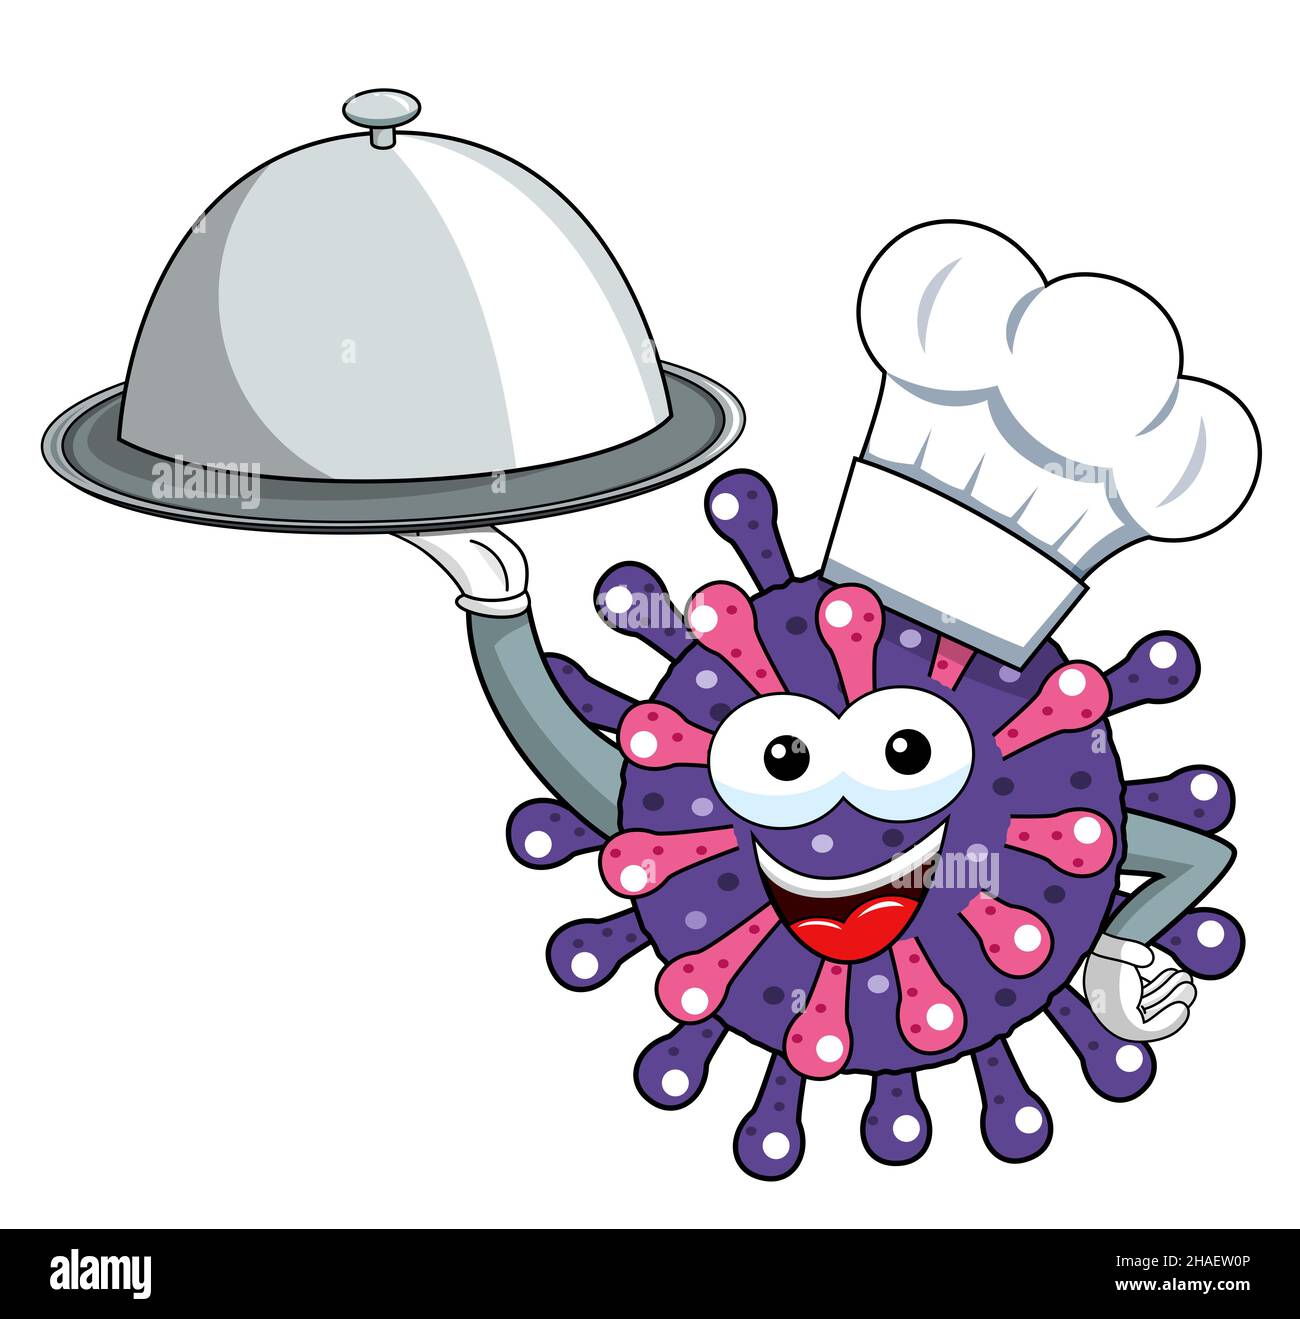 Cartoon mascot character virus or bacterium cook or chef tray meal isolated vector illustration. Stock Photo